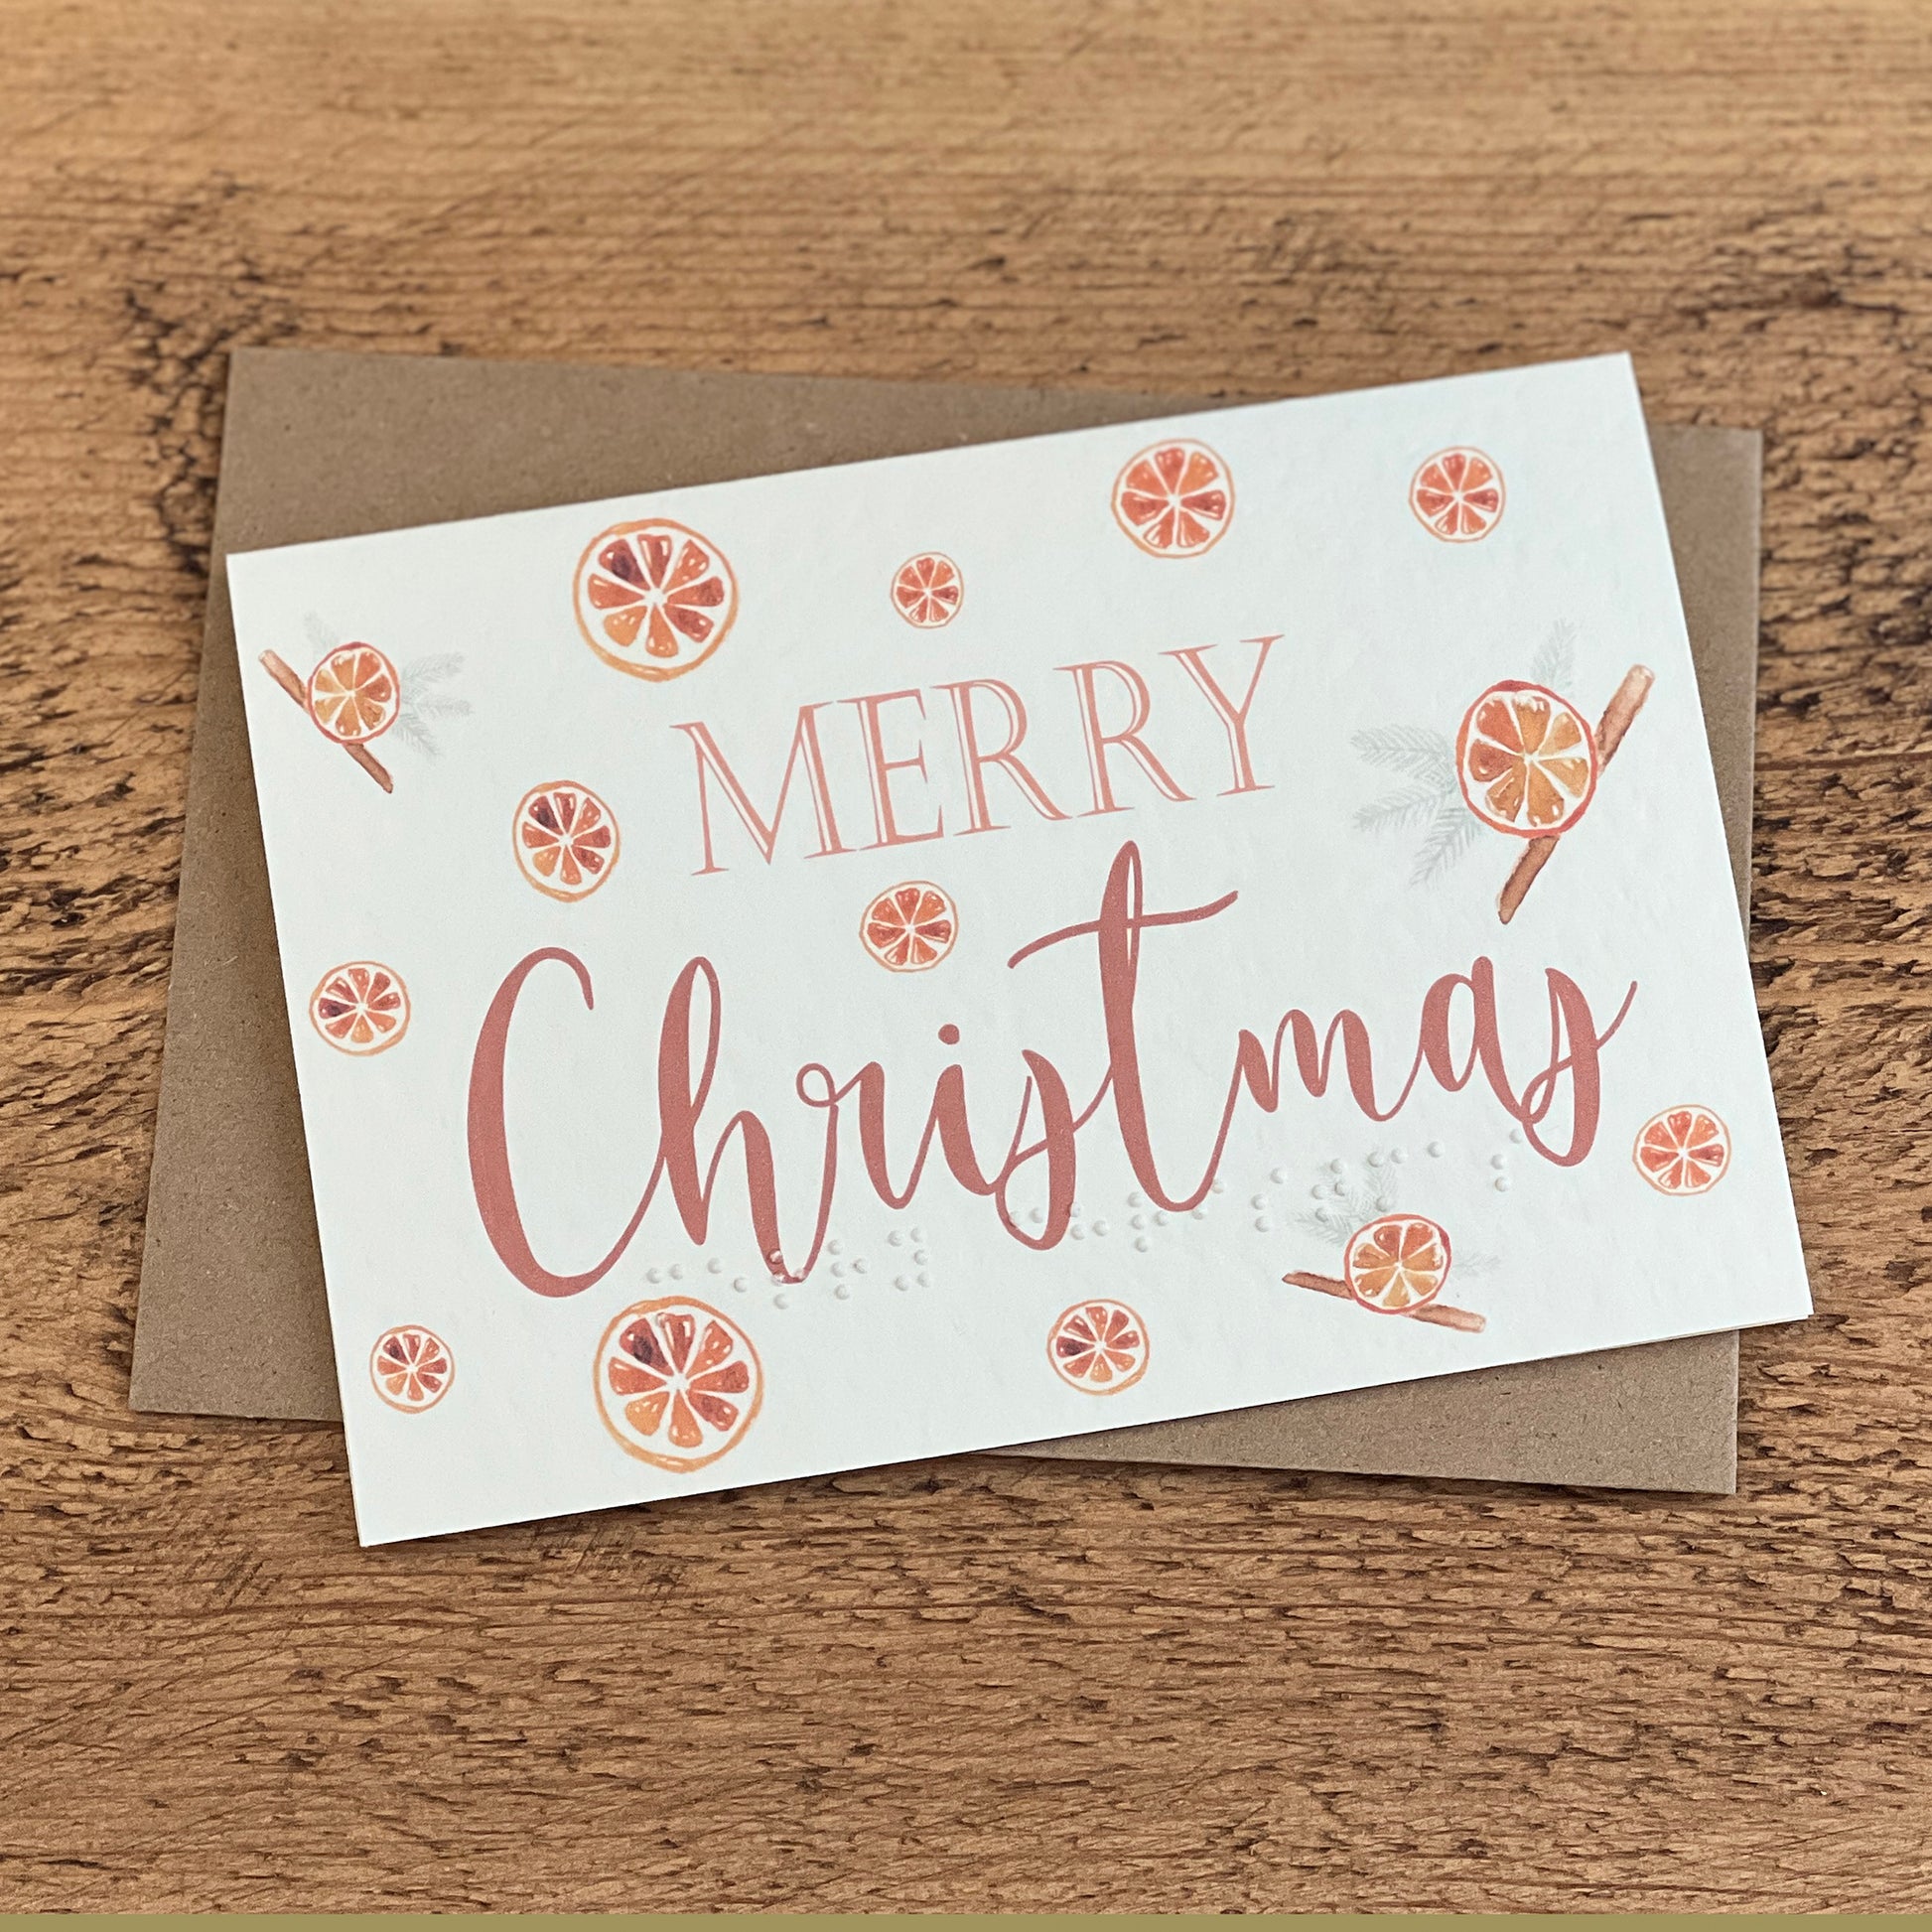 A textured white card with Merry Christmas written in a red font with citrus drawings around the card, the same text is written in braille along the bottom.